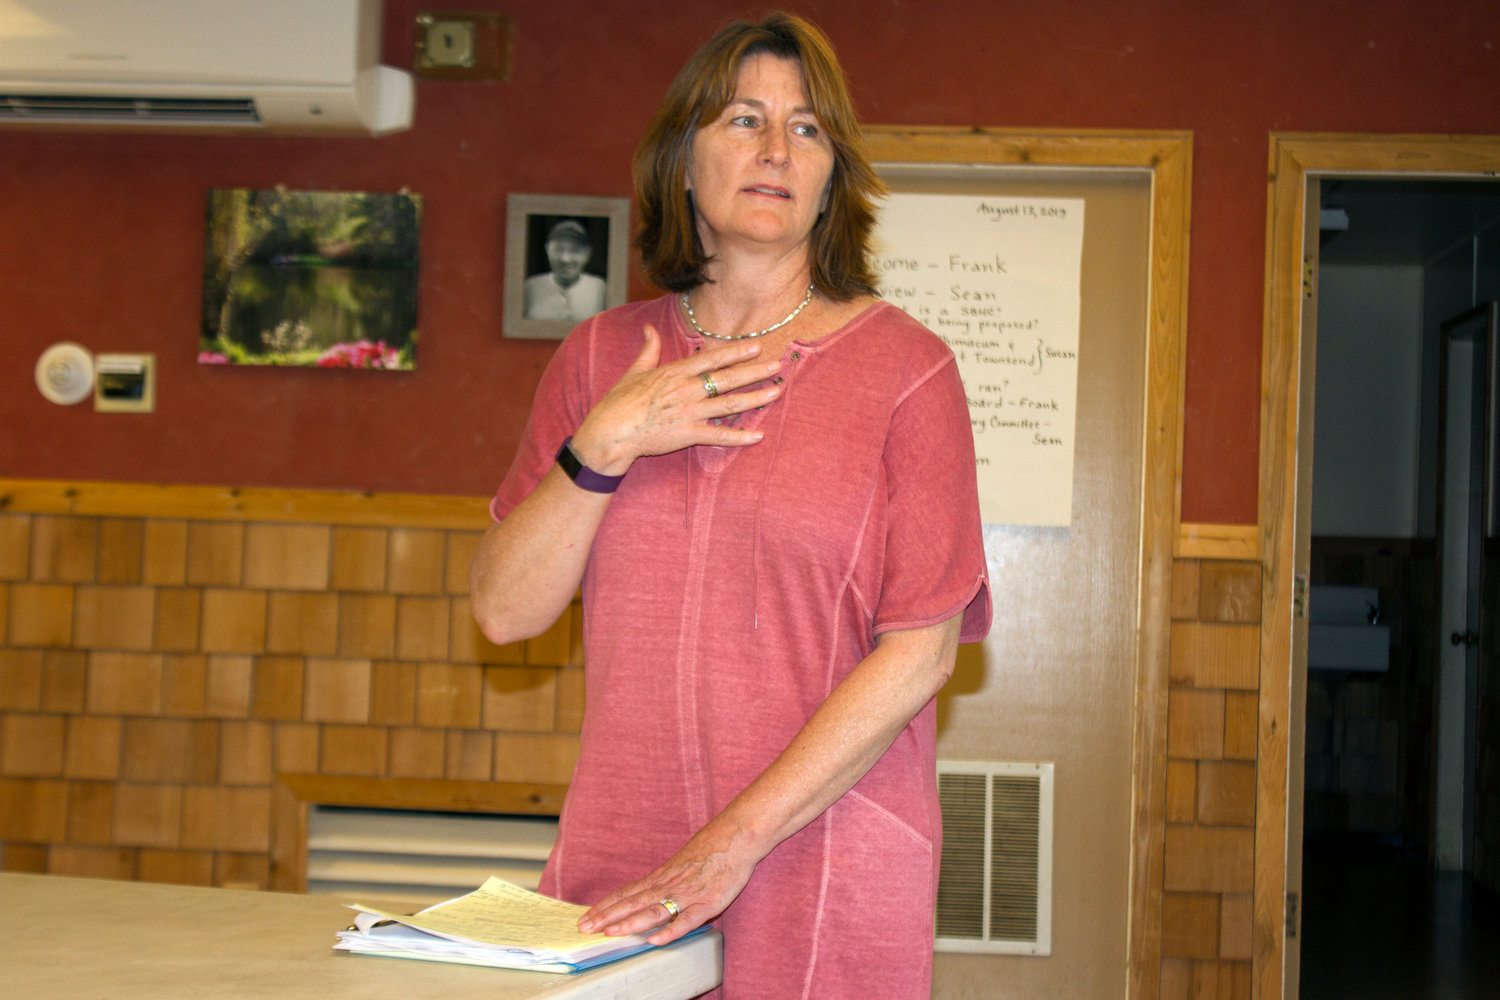 Susan O’Brien, nurse practitioner for the School-Based Health Clinic (SBHC) at Port Townsend High School, explains how a School-Based Health Center could work in Quilcene.